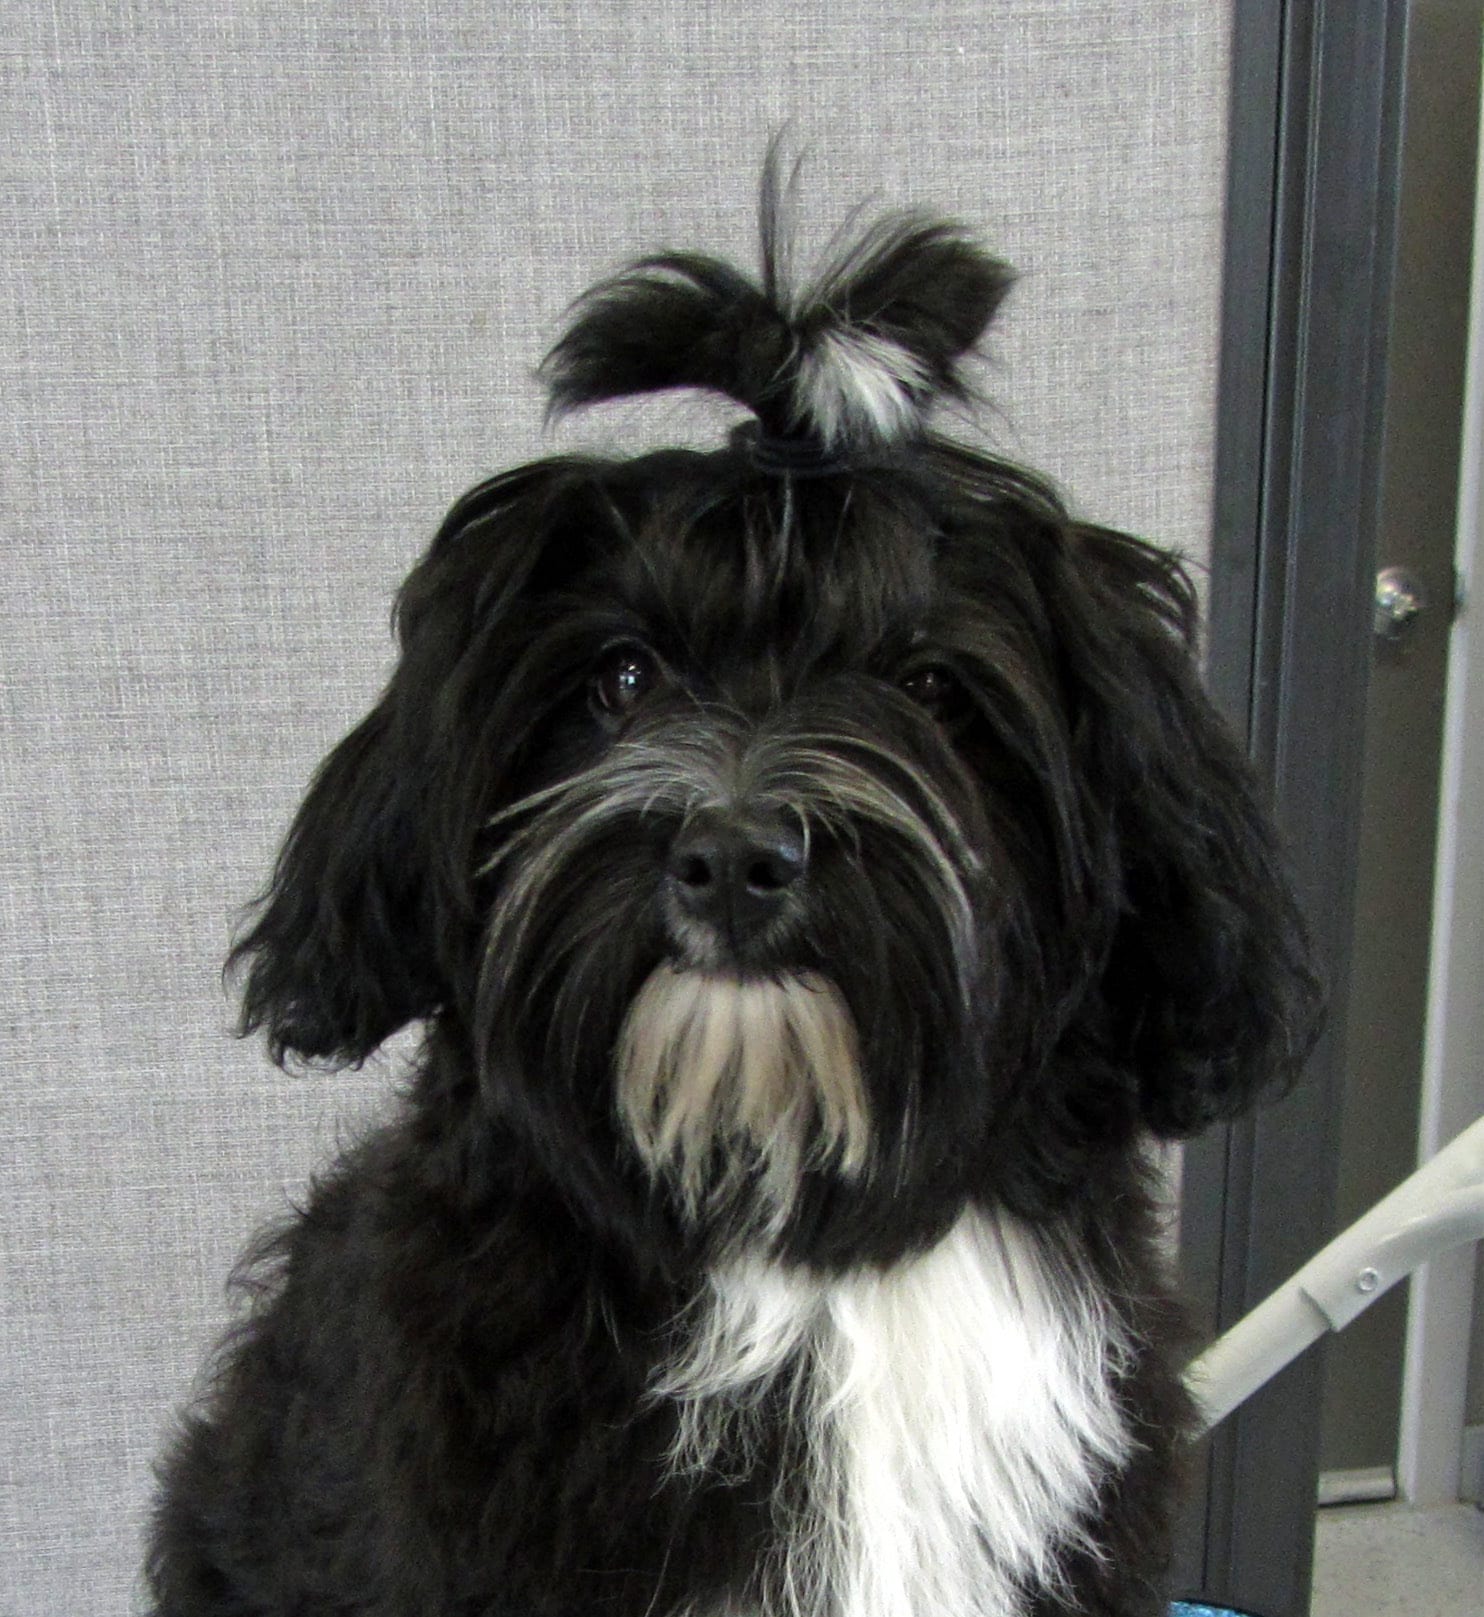 a black and white dog with the hair on top of its head tied